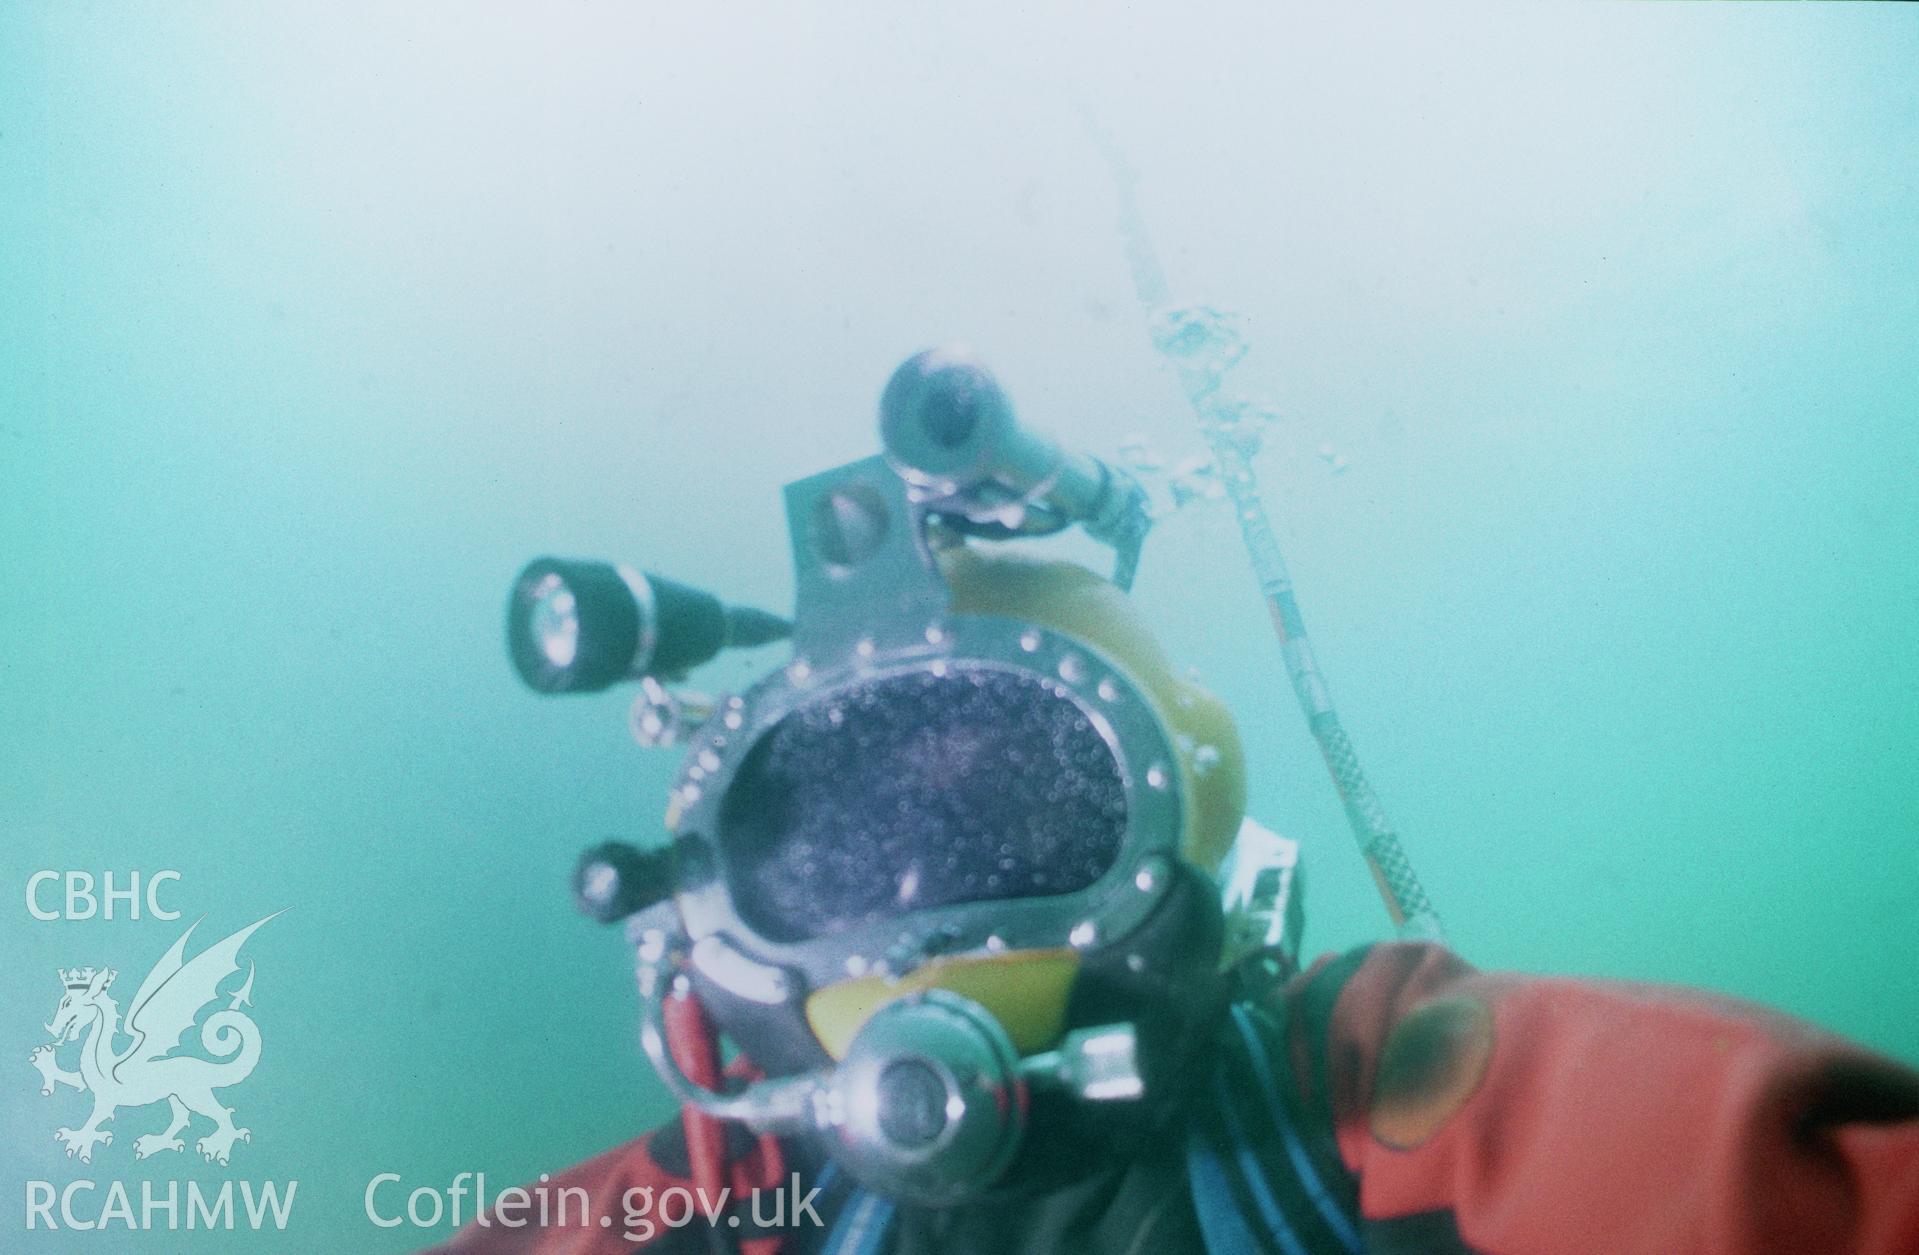 View showing diver from the Archaeological Diving Unit ascending to the surface after completing the dive, one of a set of 41 colour slides from an underwater survey of the Tal-y-Bont designated shipwreck, carried out by the Archaeological Diving Unit.